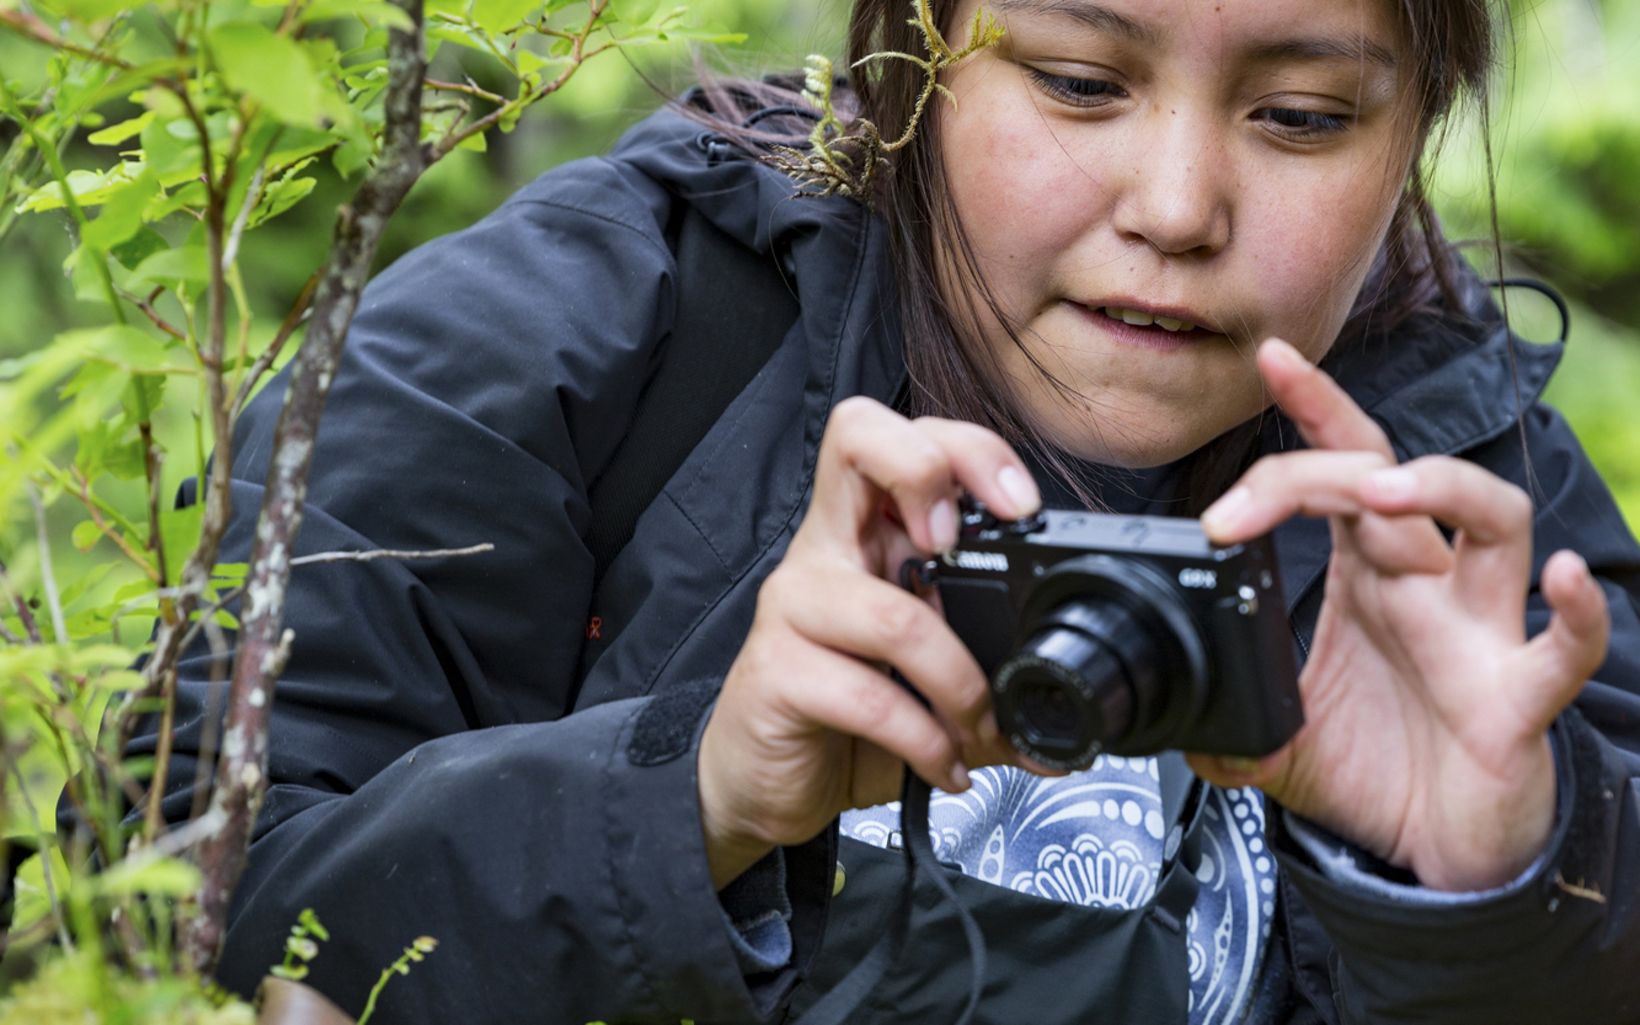 Closeup of a young person taking a photo of some plants.